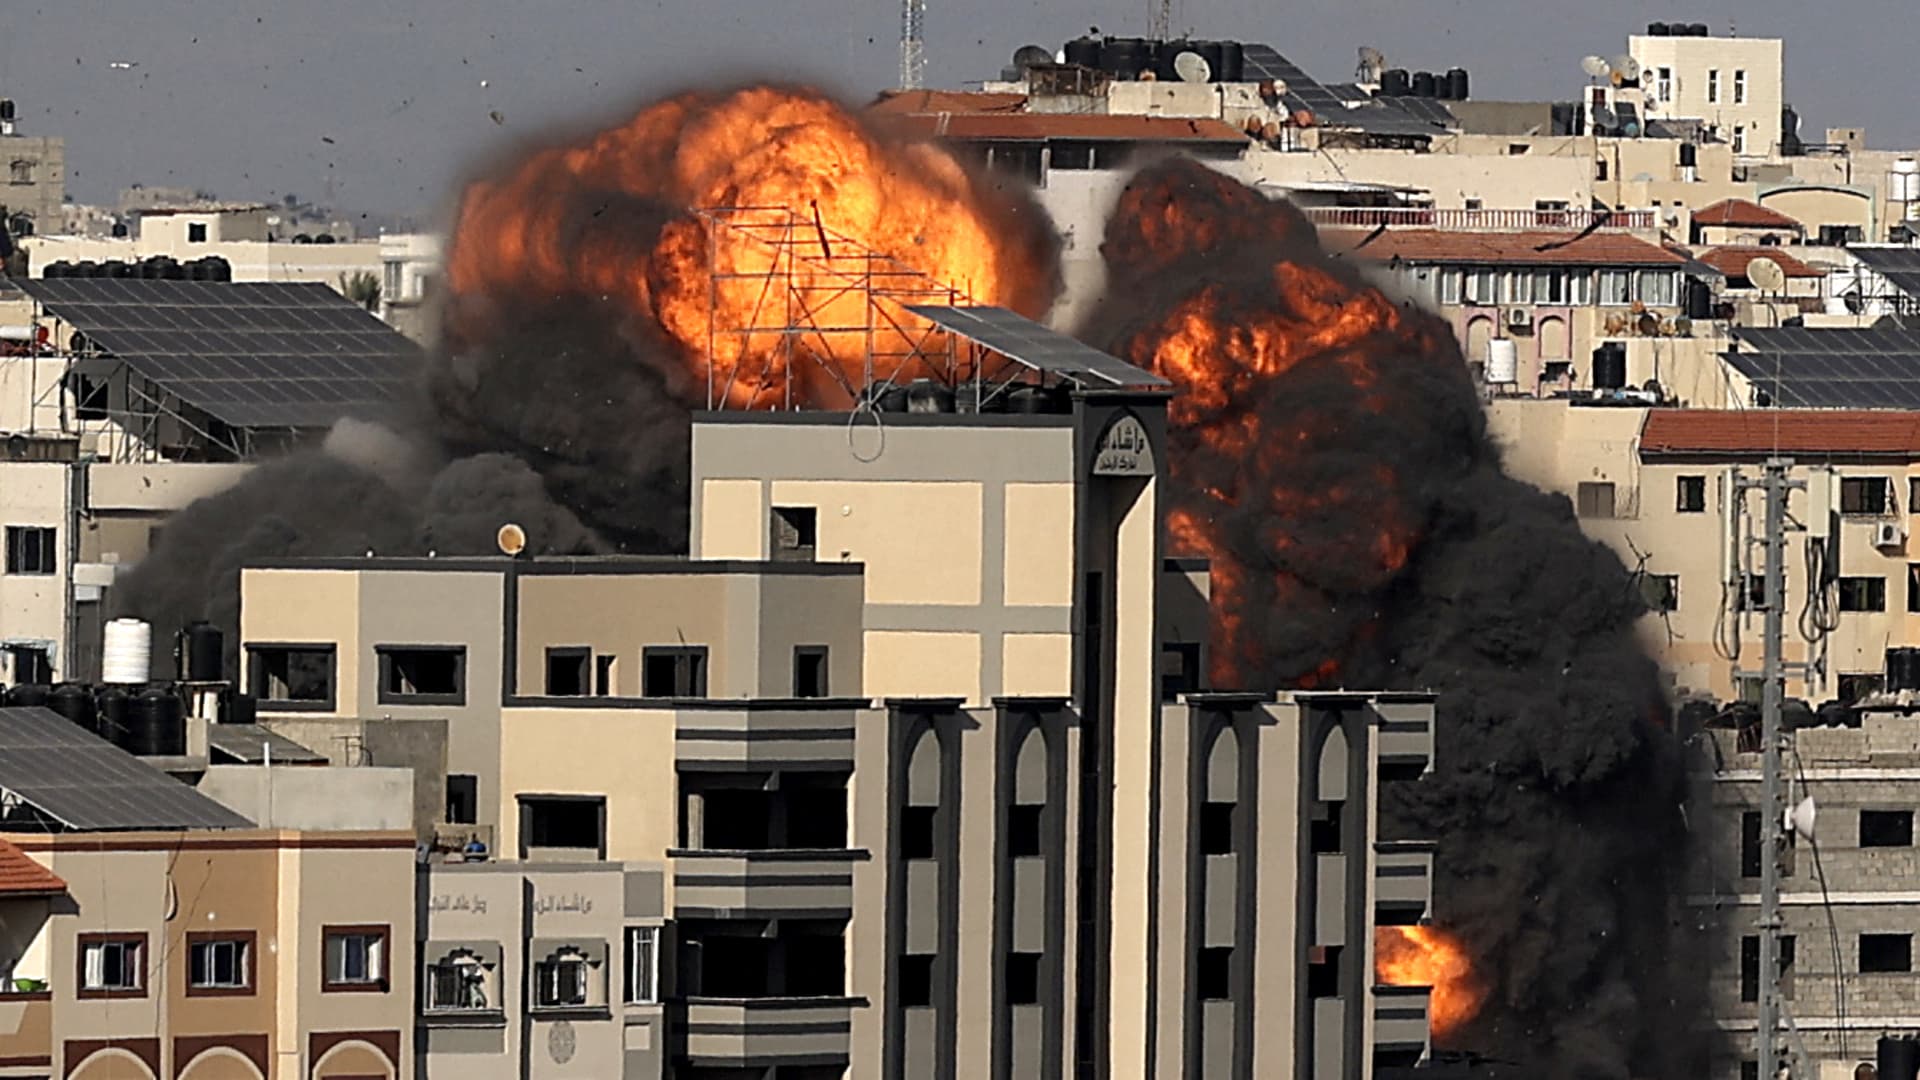 A picture shows the explosion after an Israeli strike targeted a building in Gaza City on May 14, 2021.